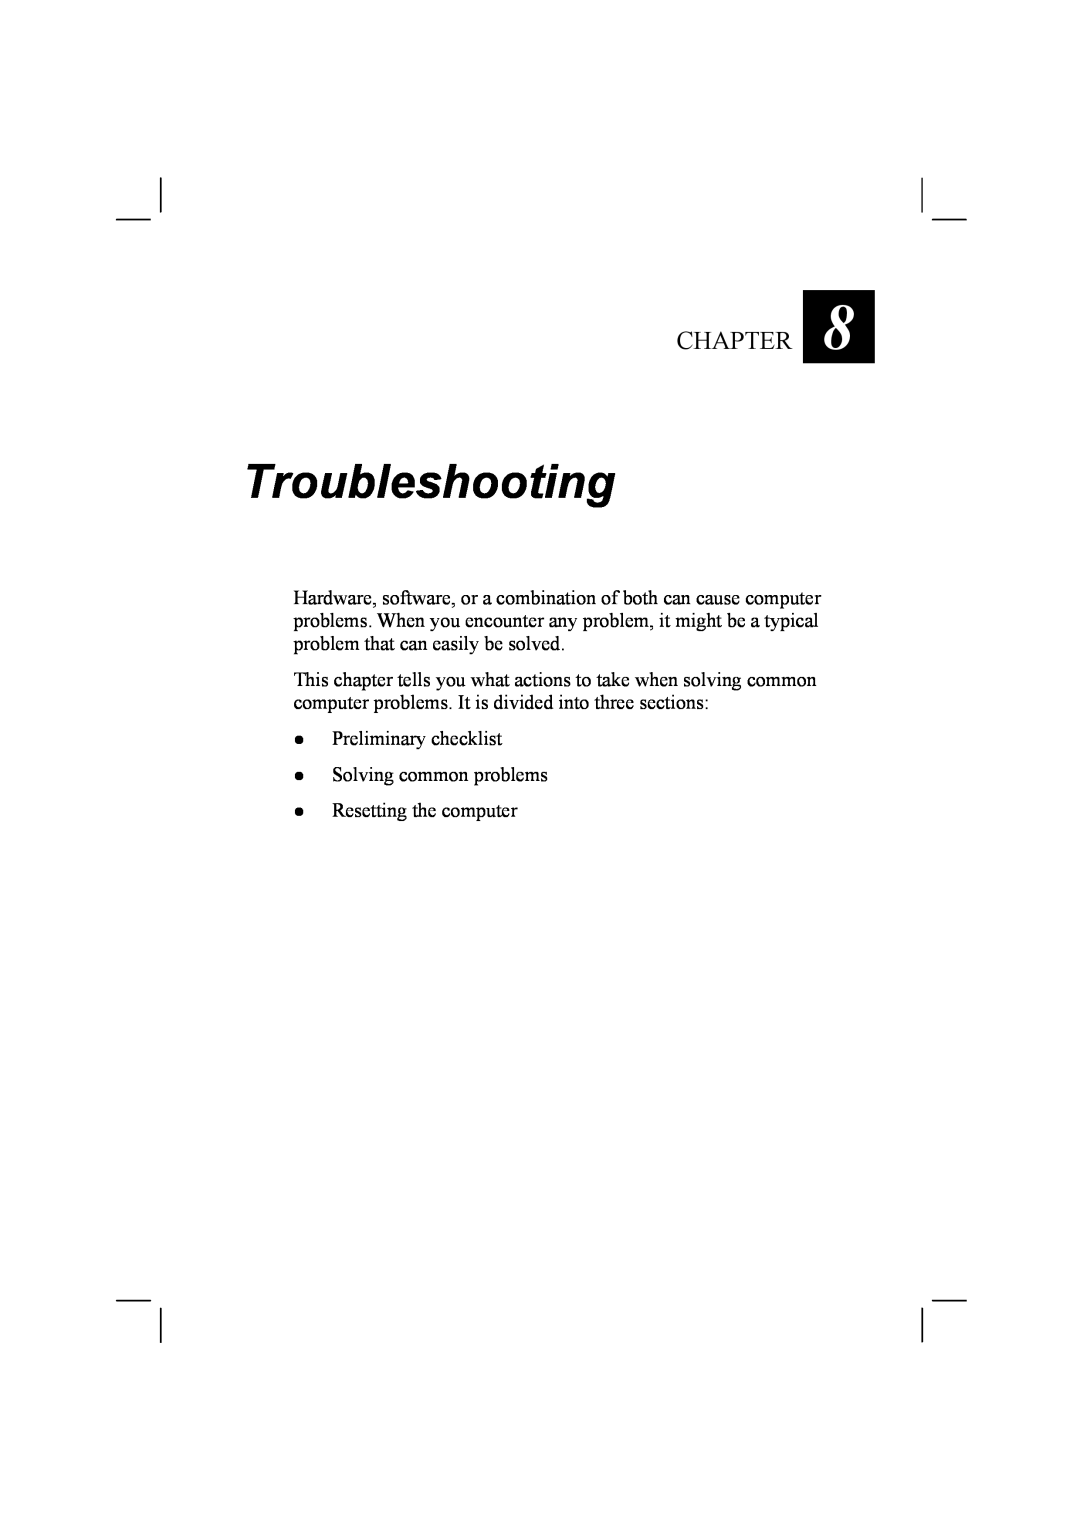 TAG 20 Series manual Troubleshooting, Chapter 